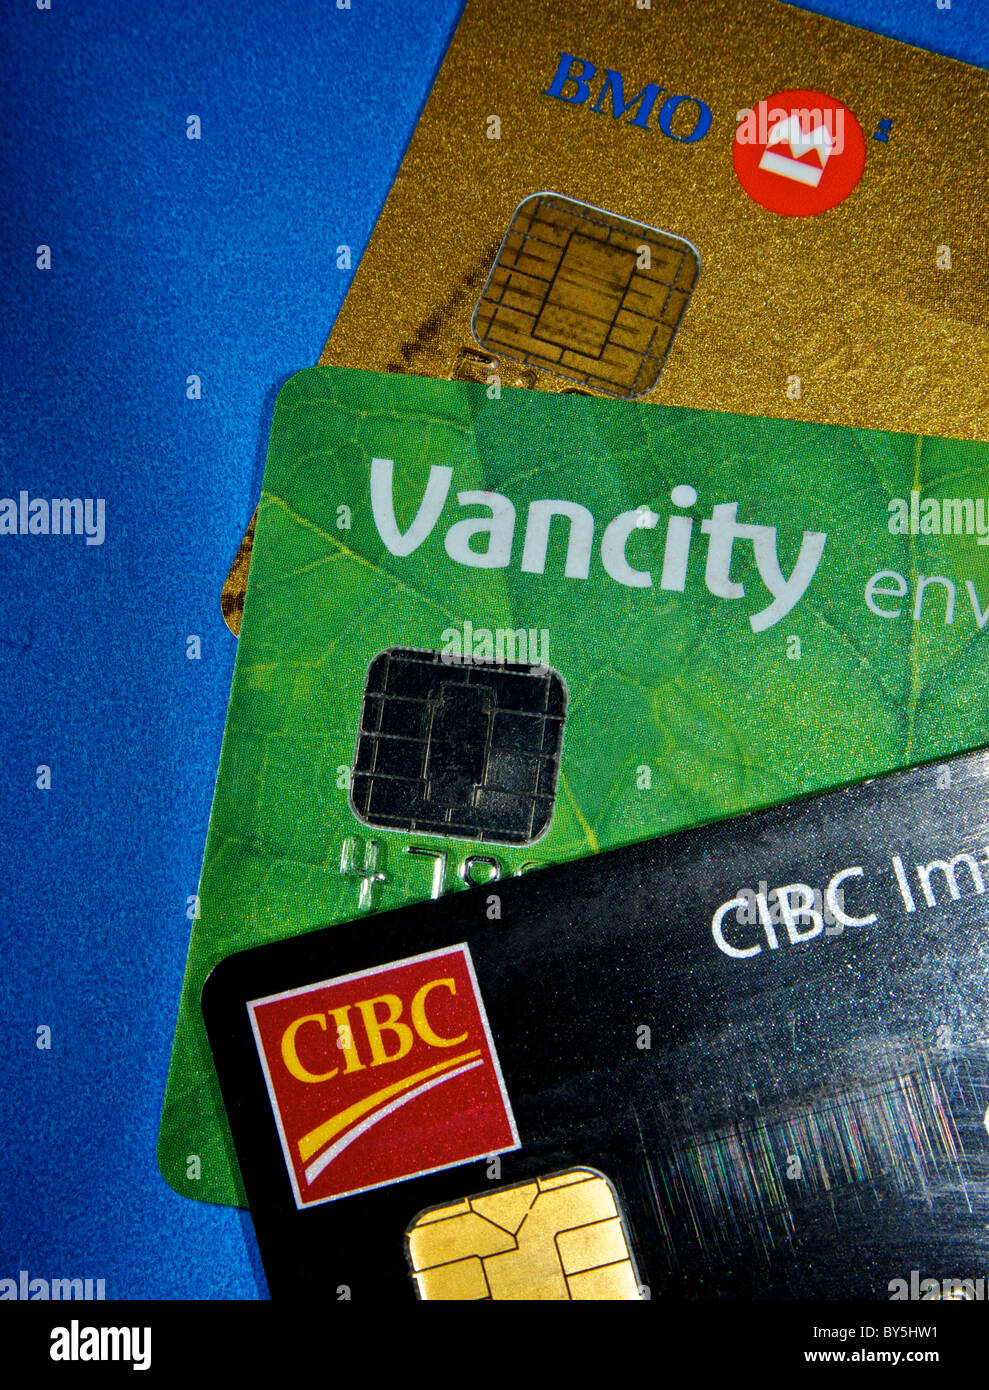 New bank credit charge cards with embedded security computer chip identification 'tap and go' technology Stock Photo